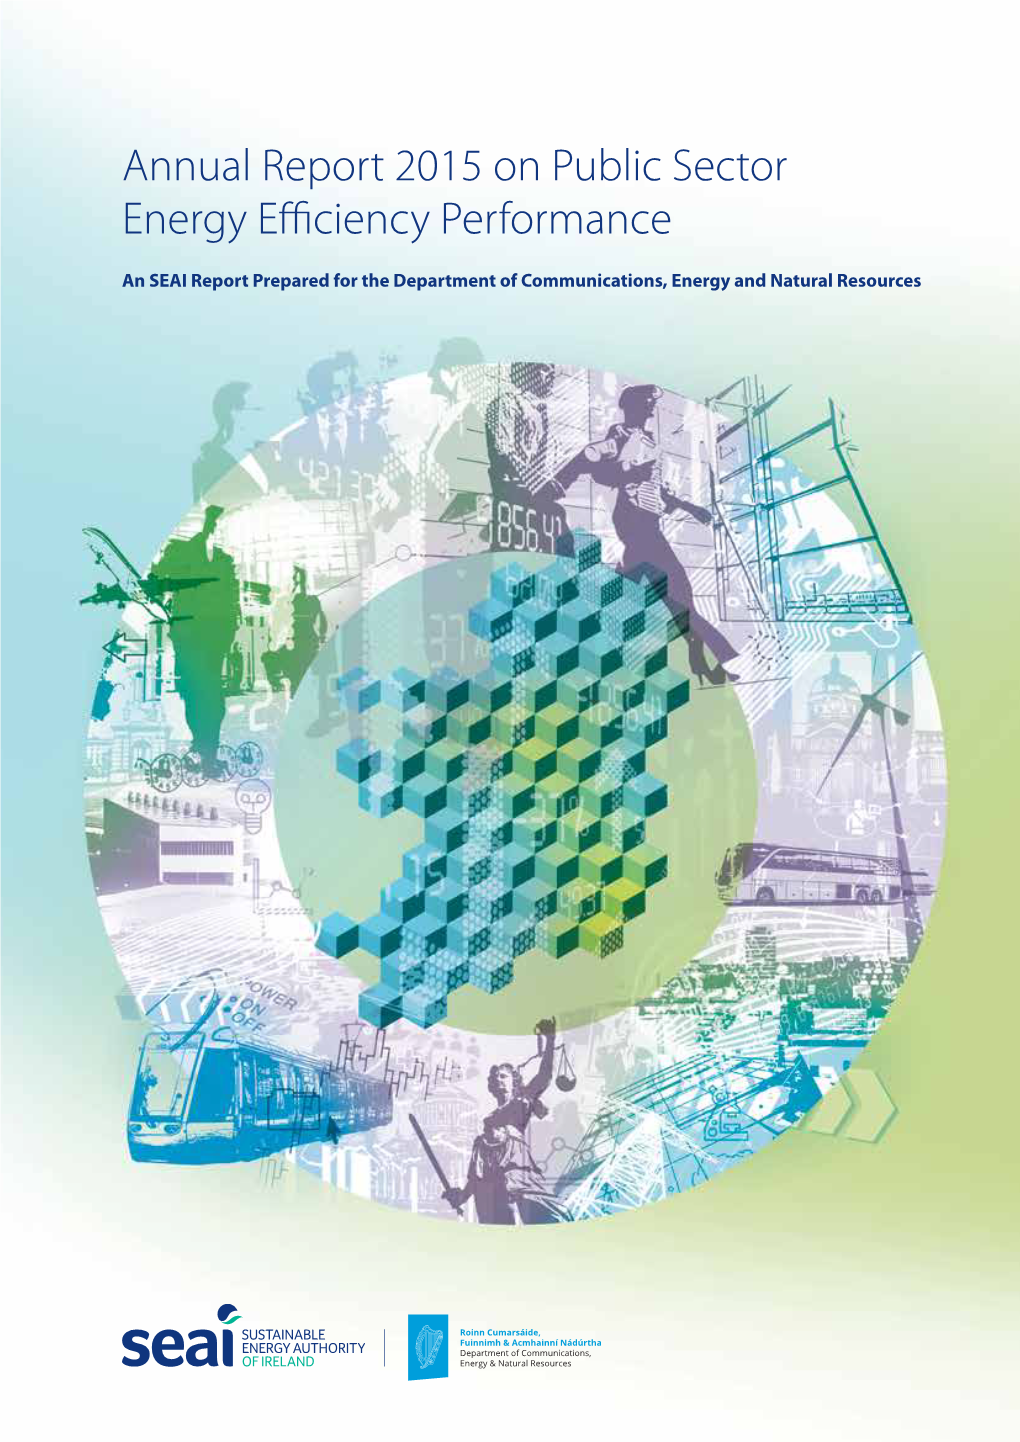 Annual Report 2015 on Public Sector Energy Efficiency Performance 1